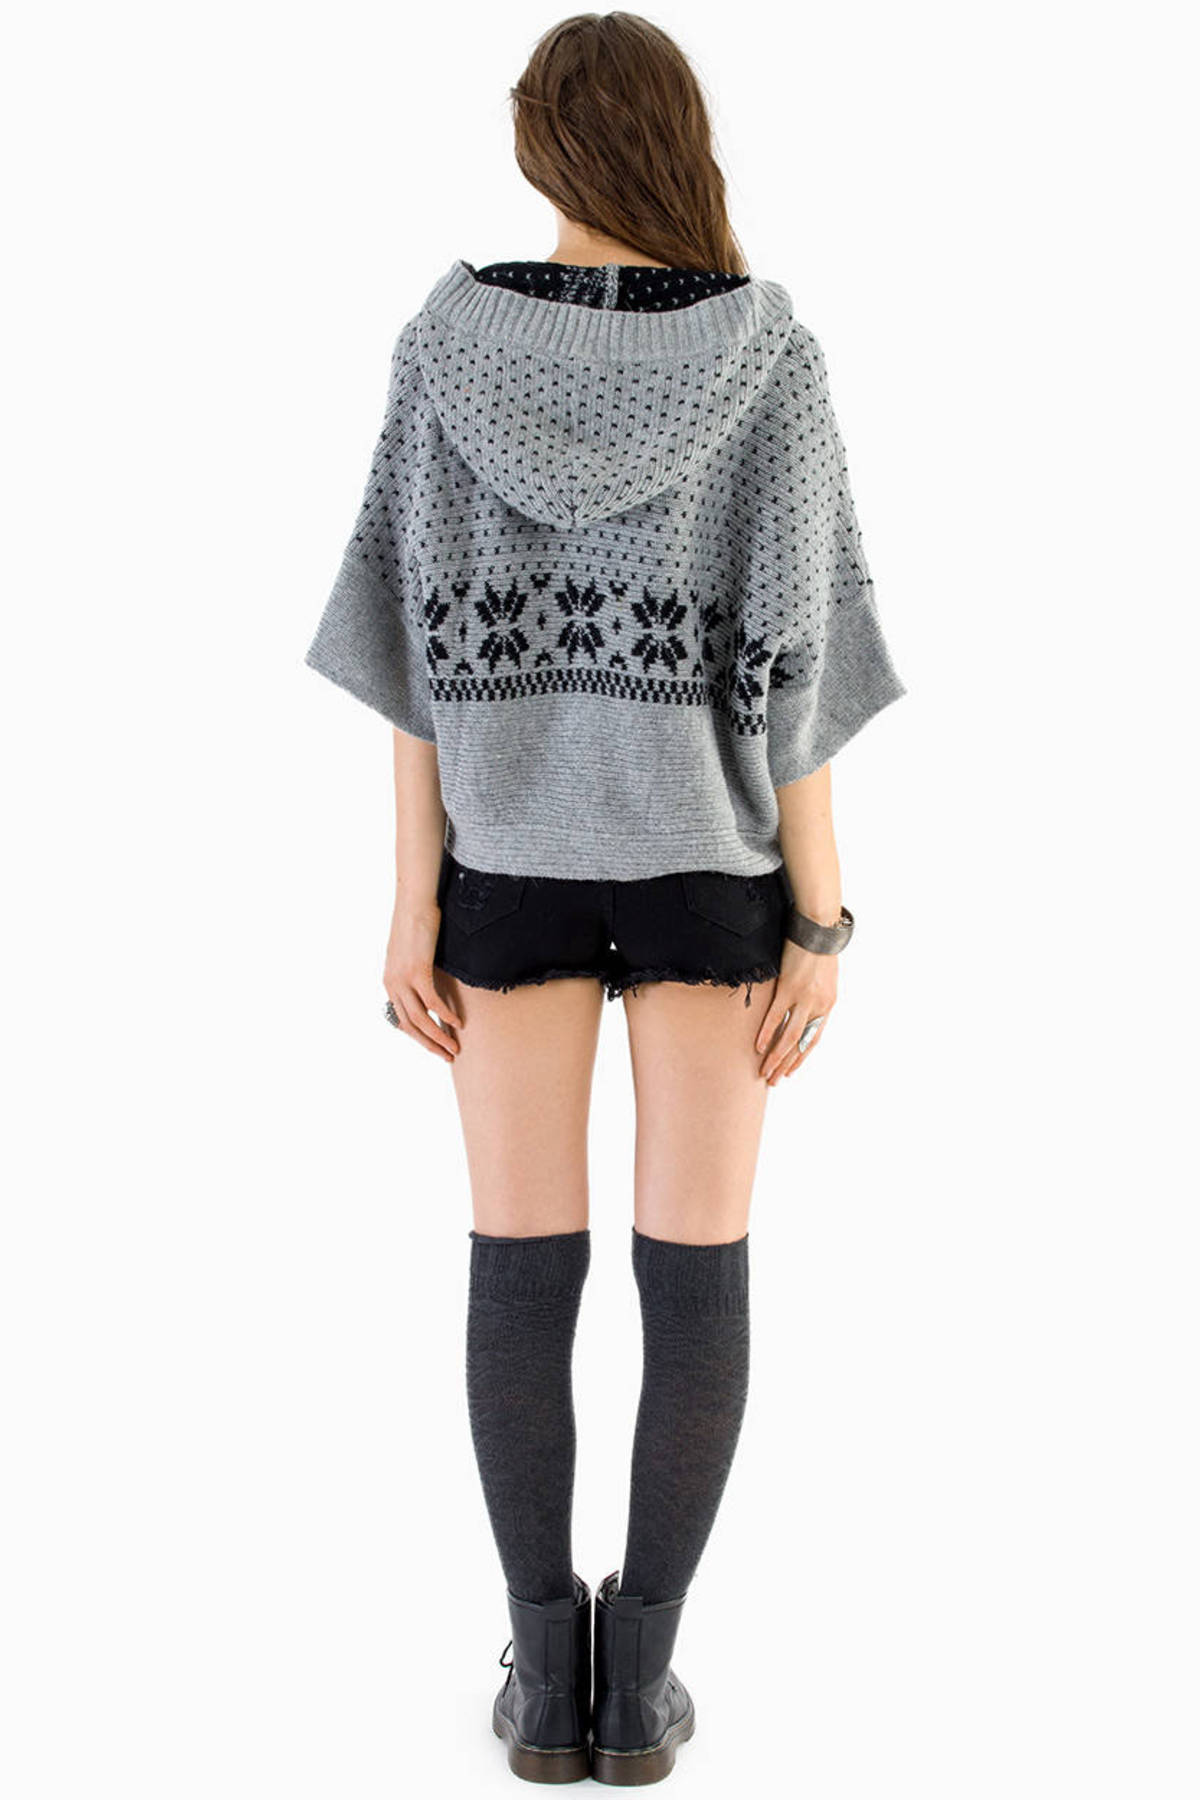 let it snow sweater gray sequins